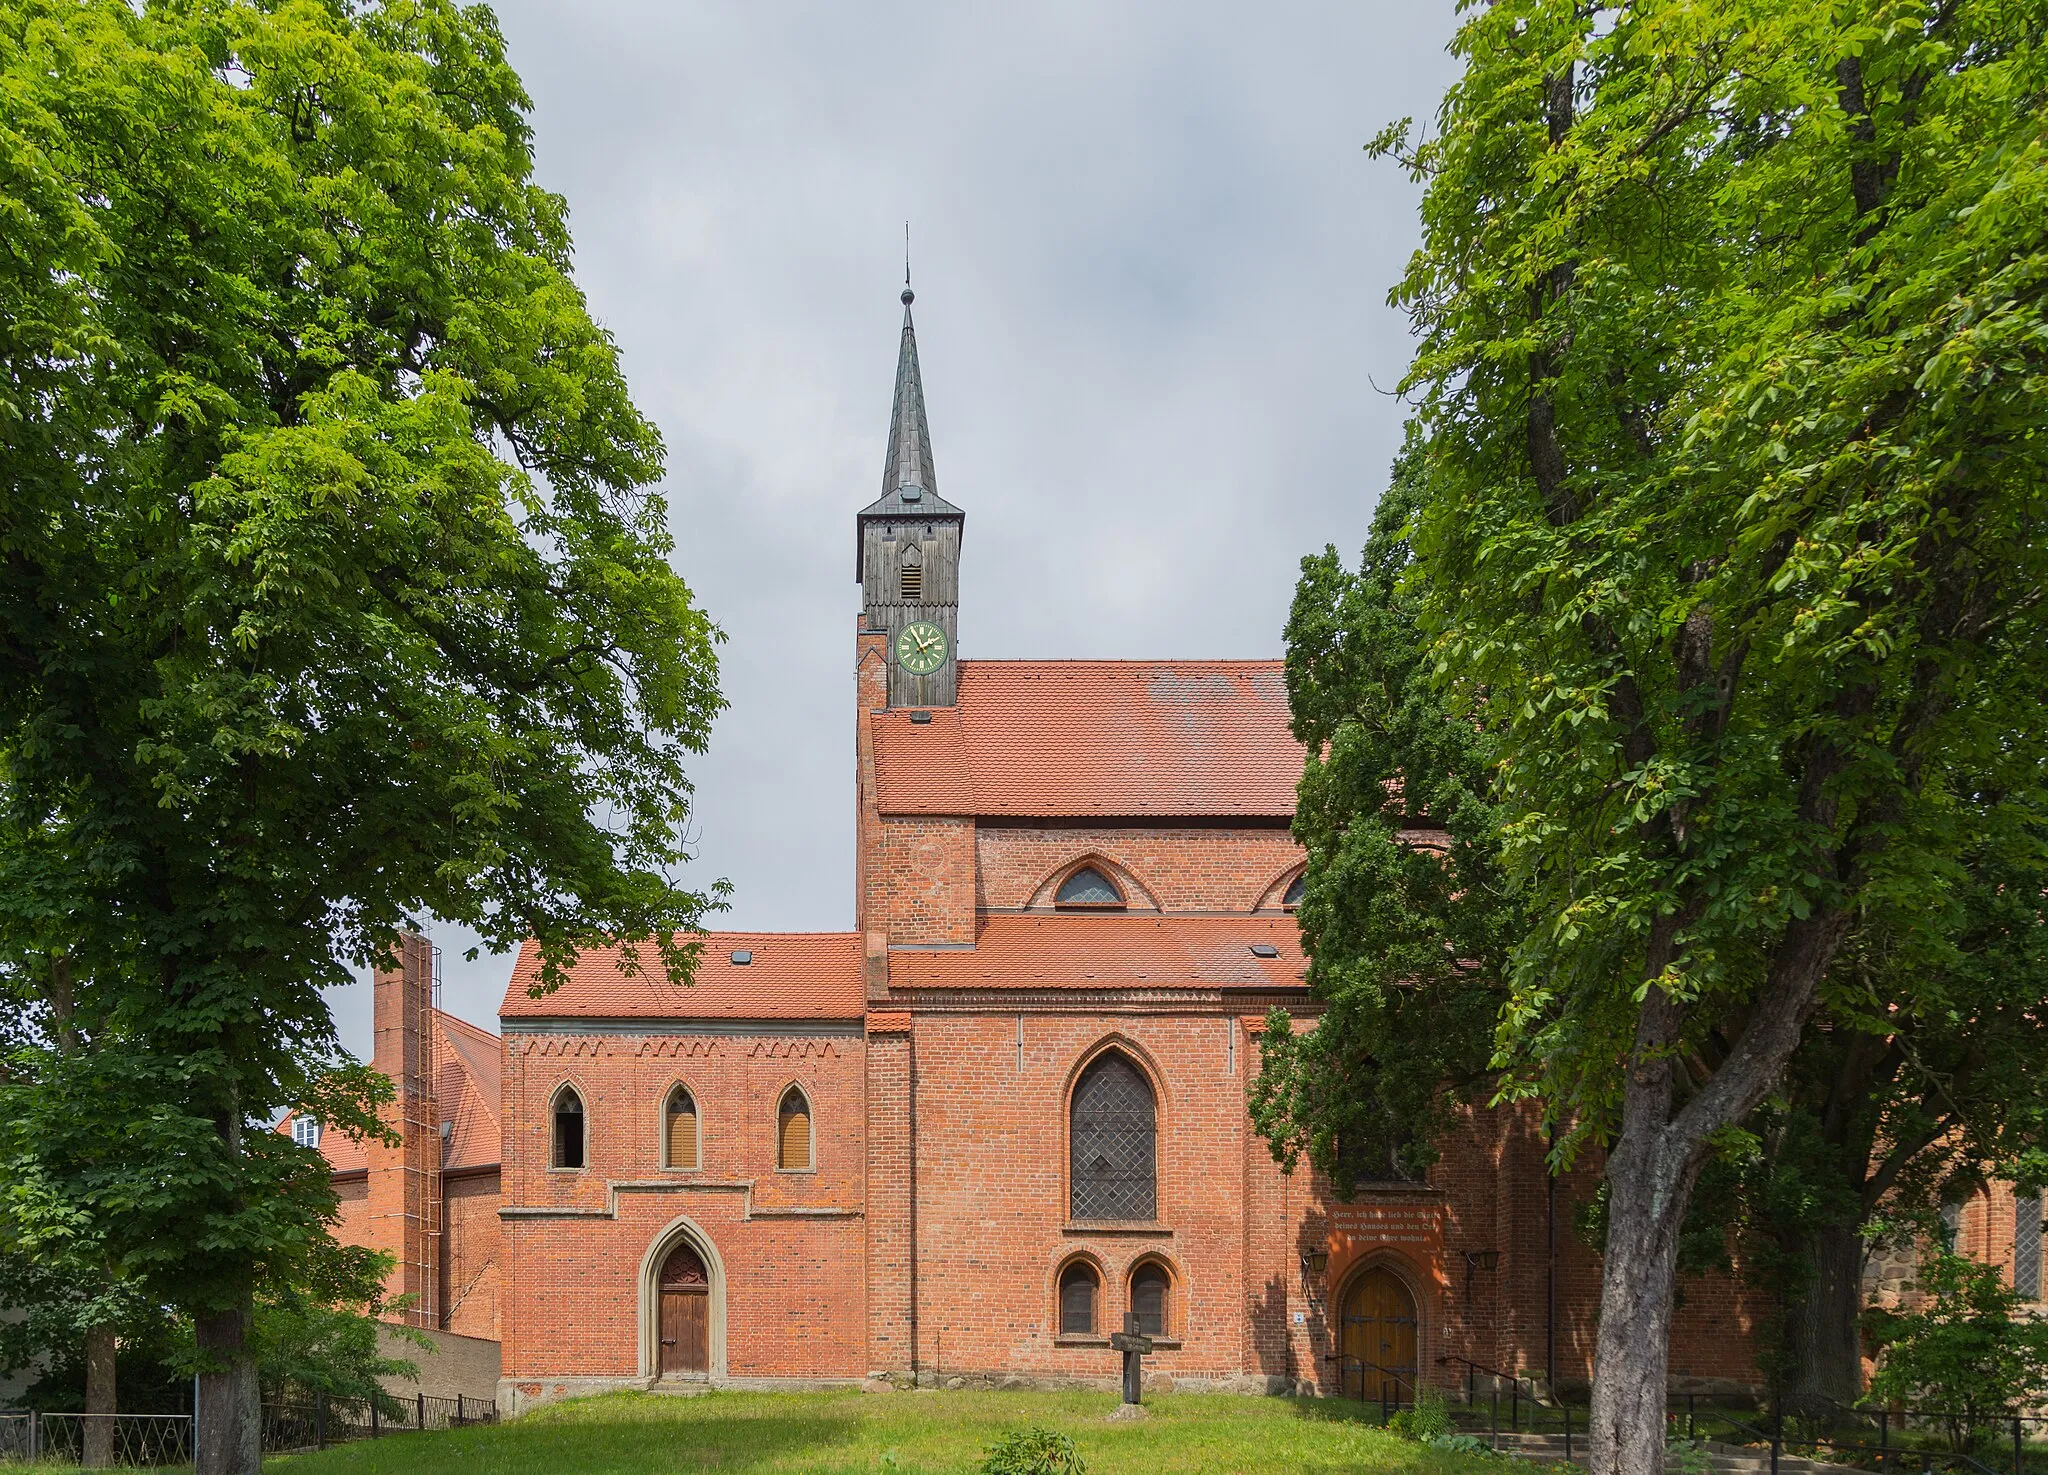 Photo showing: St John, the Protestant city church of Tessin near Rostock, Amt Tessin, Landkreis Rostock, Mecklenburg-Western Pomerania, Germany. The church is a listed cultural heritage monument.